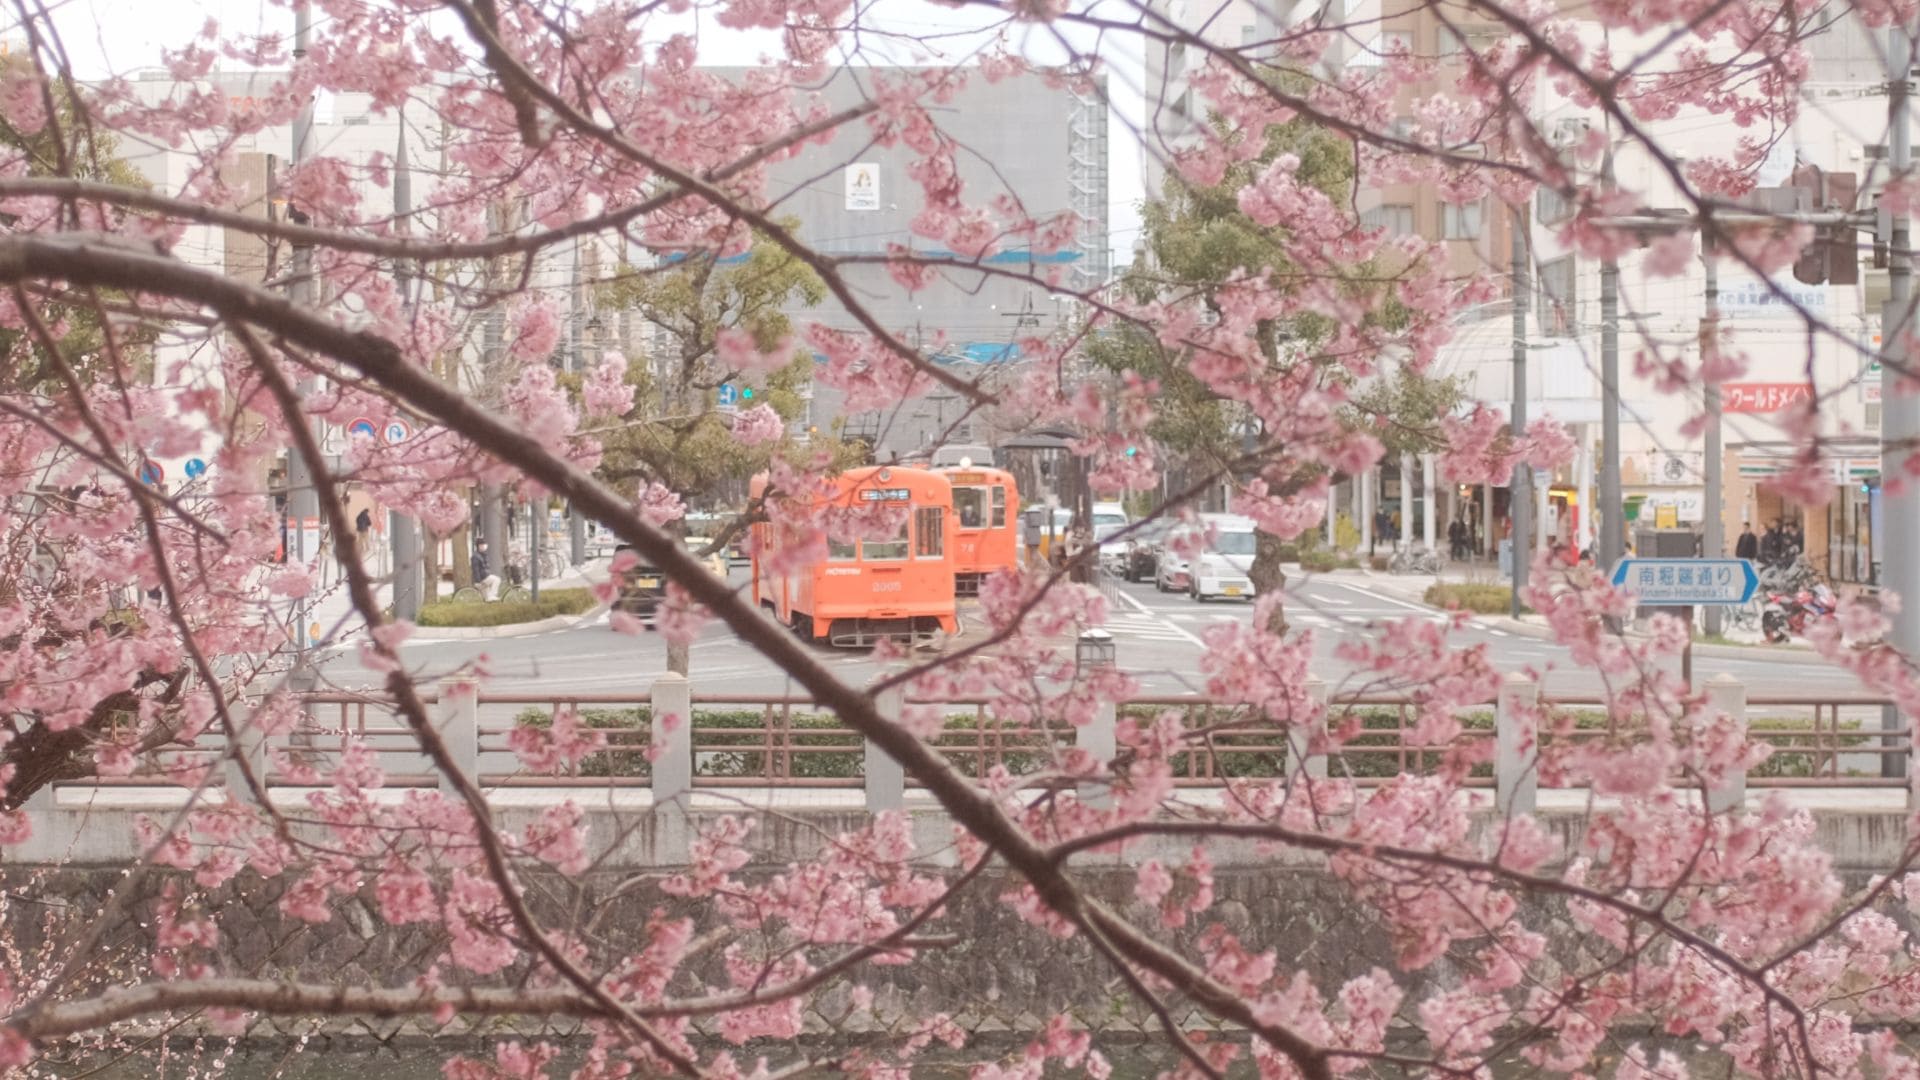 A train travels through the city with pink trees in bloom - Cherry